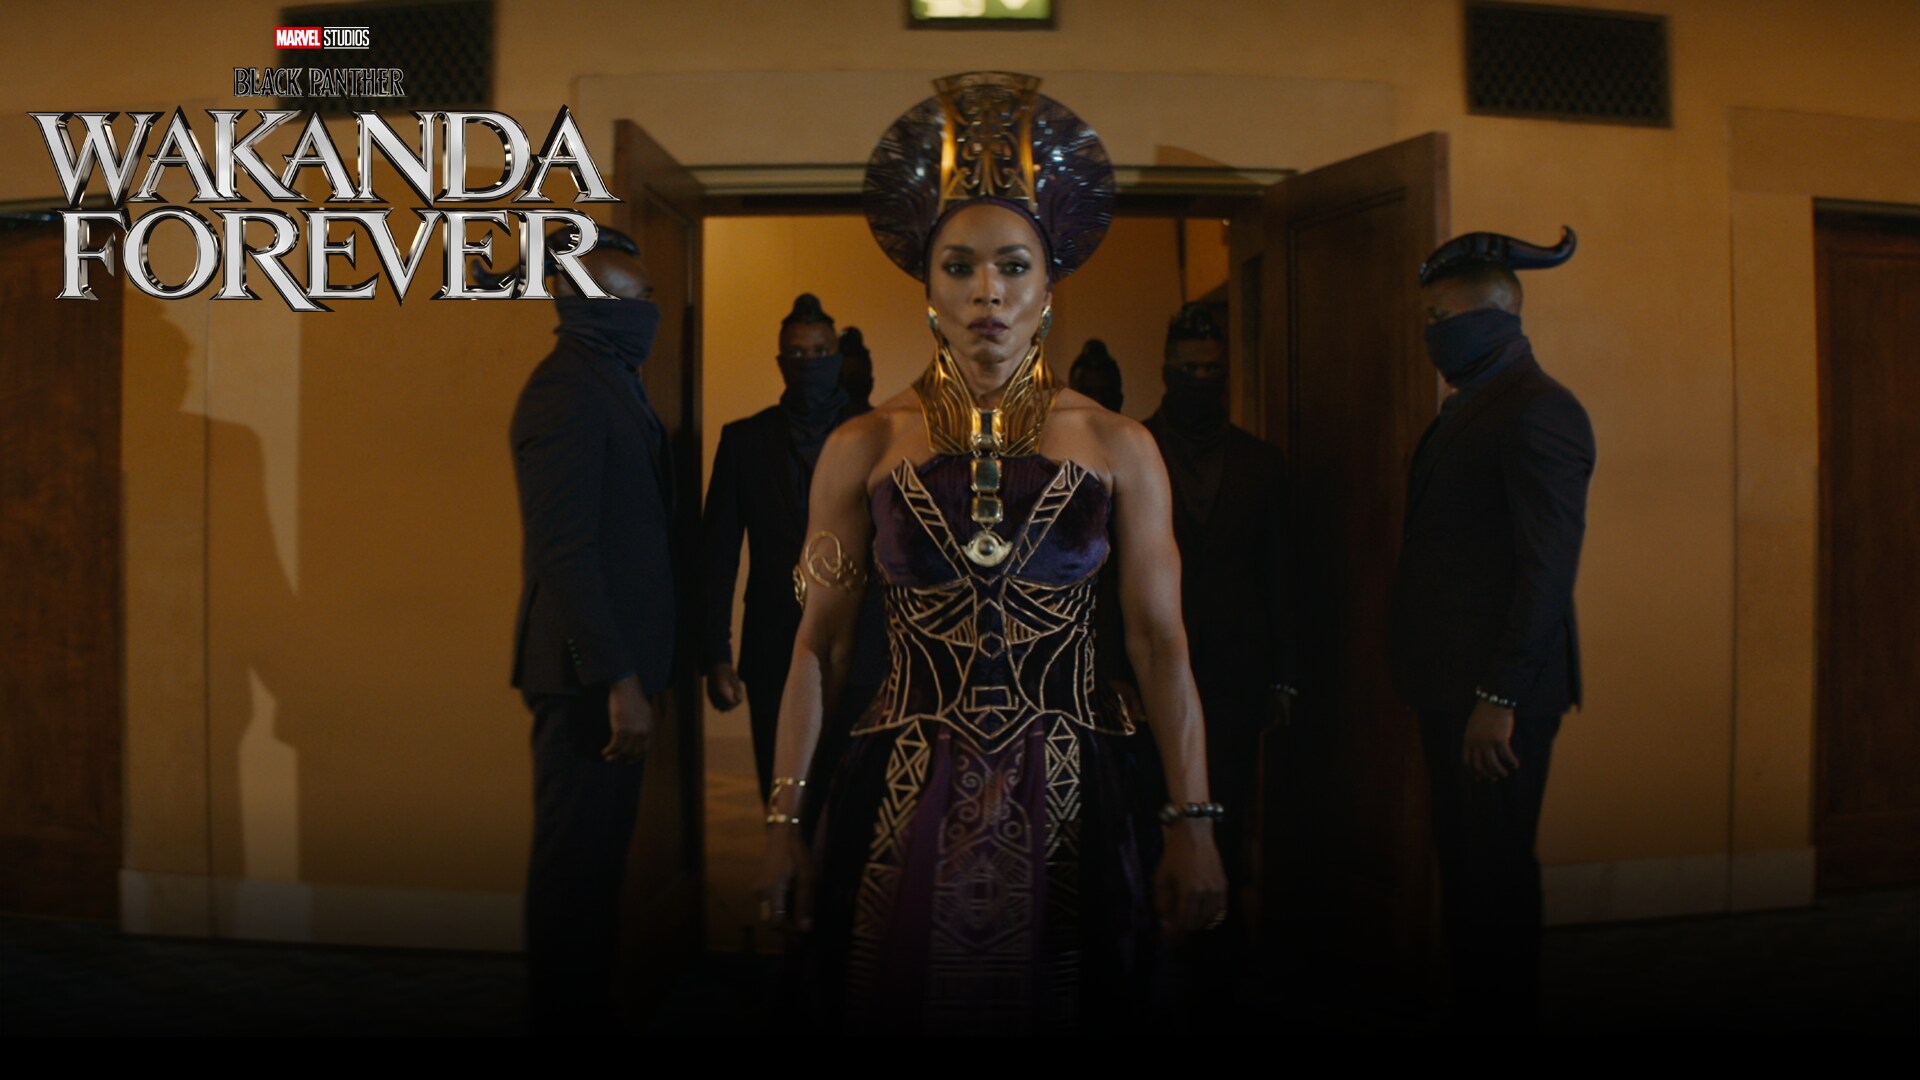 Marvel Studios’ Black Panther: Wakanda Forever | Now Playing